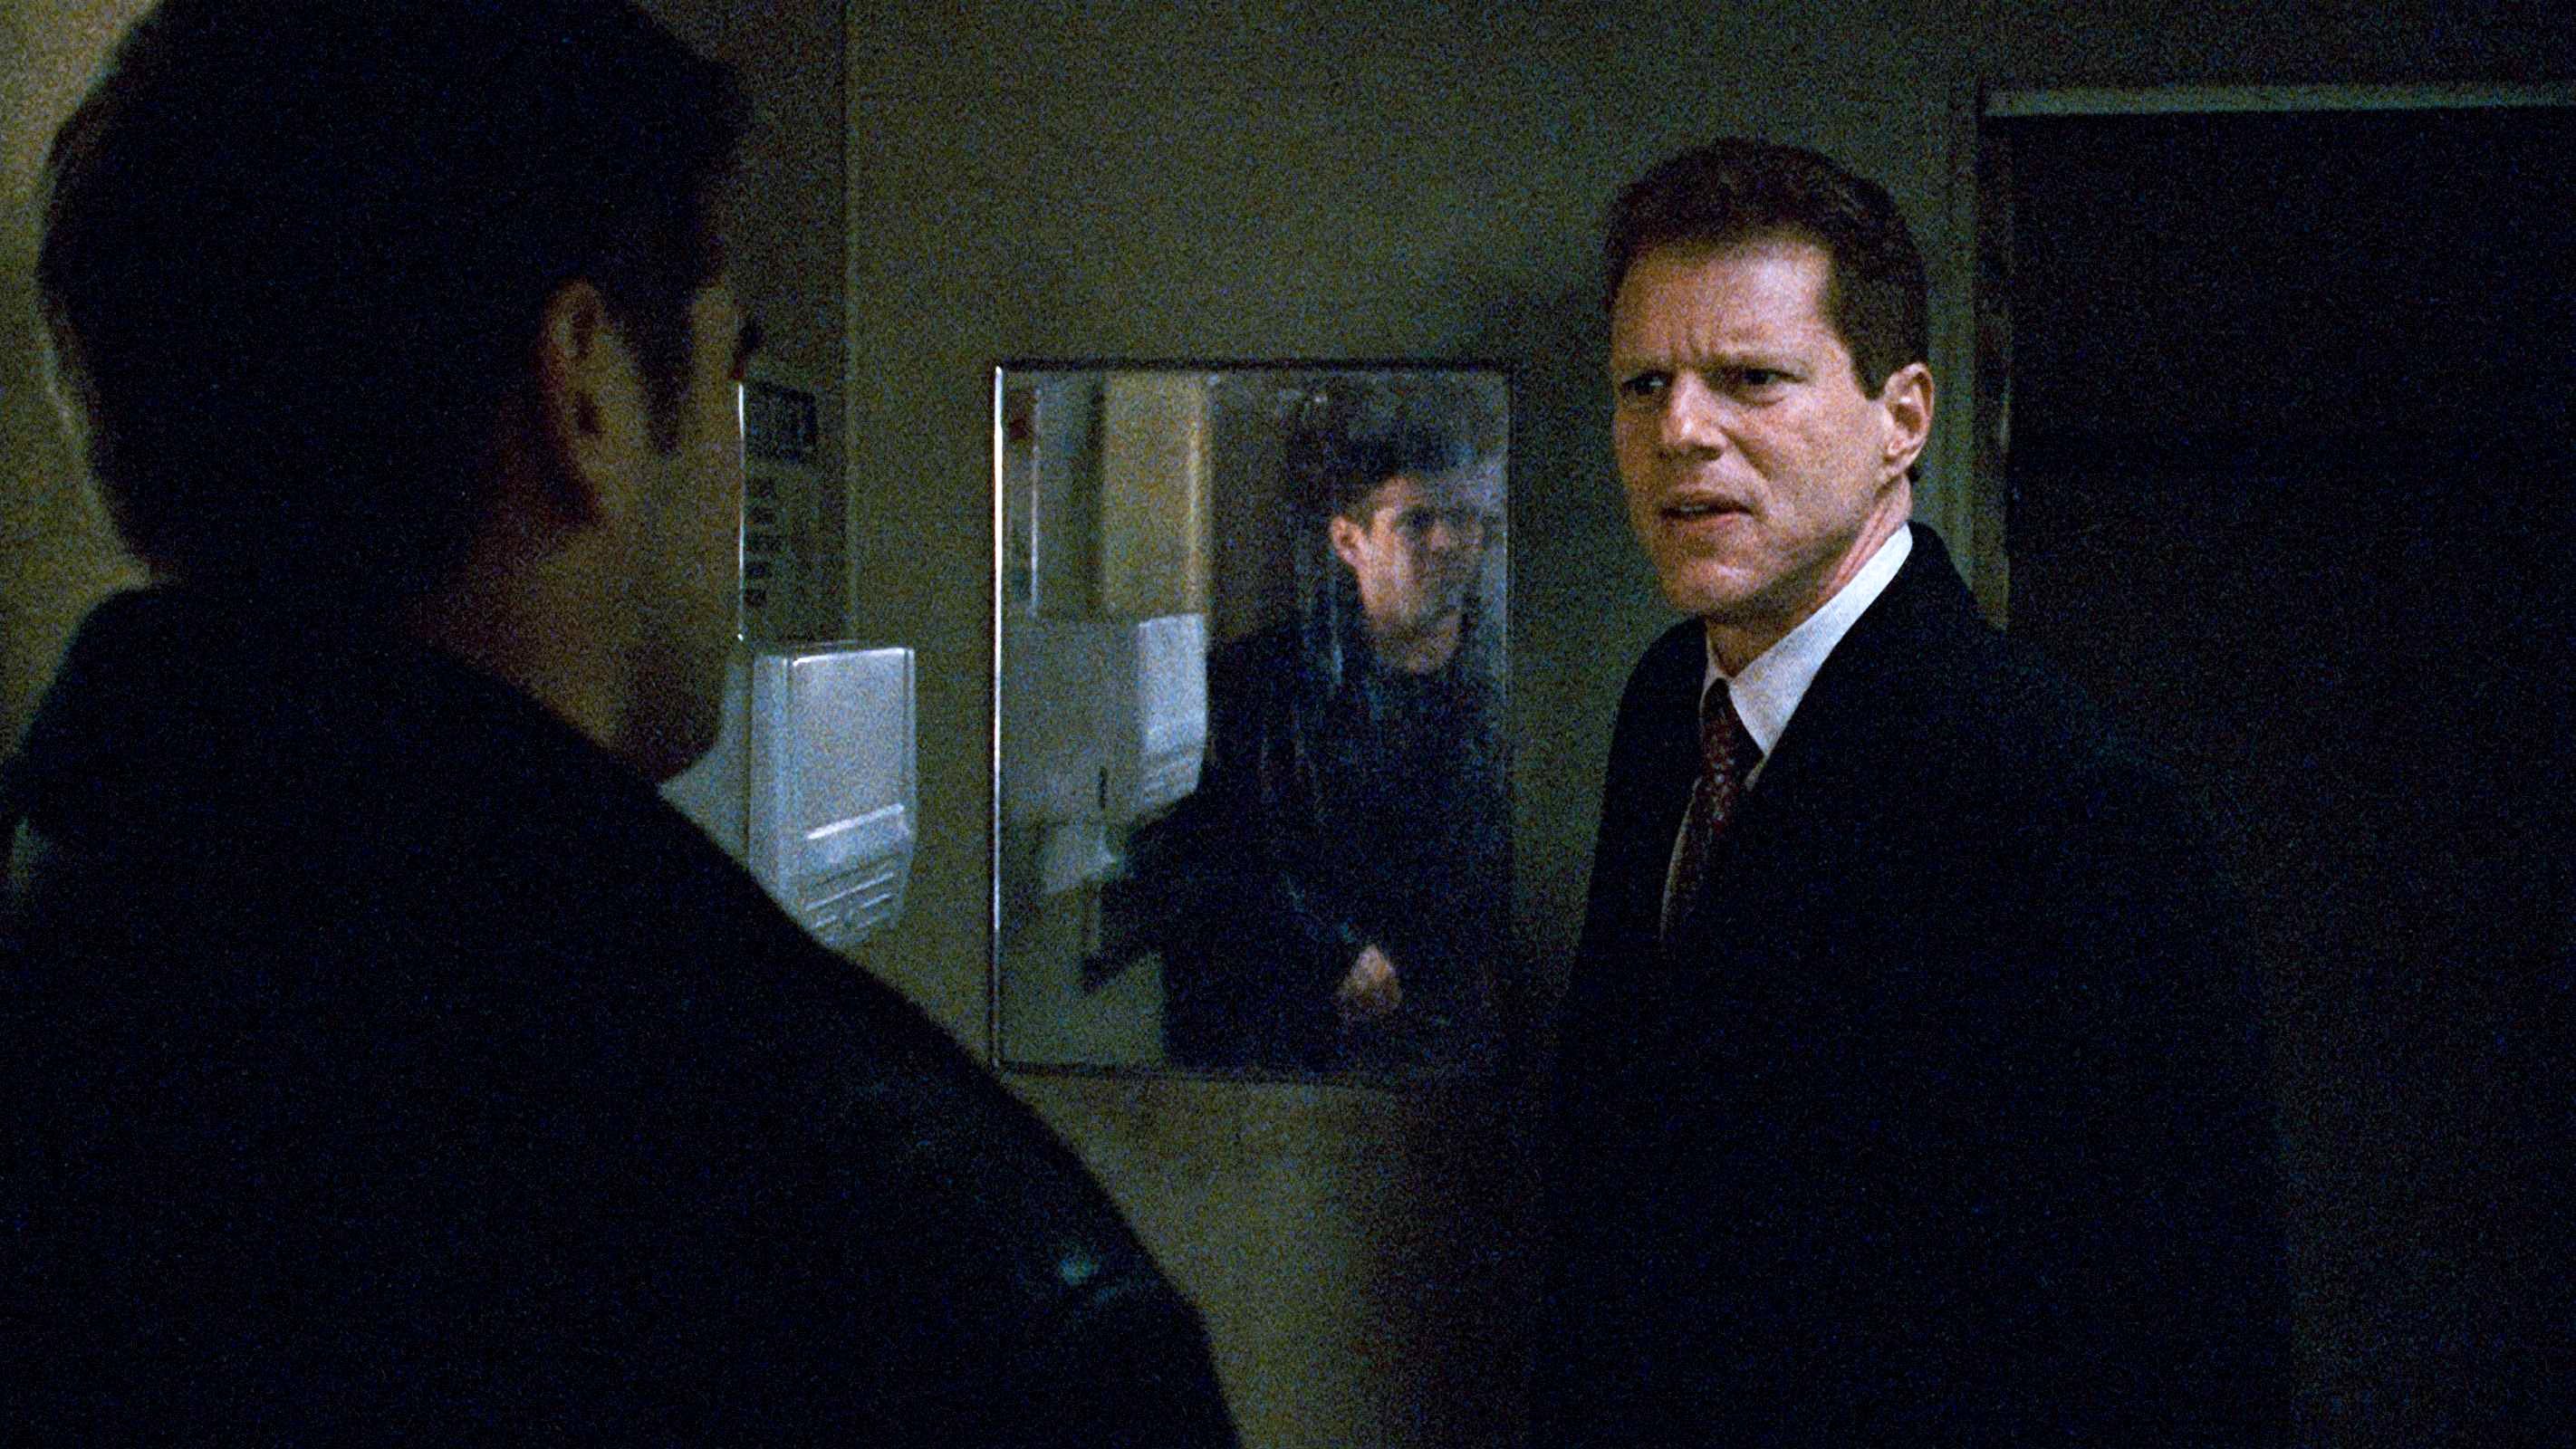 Colin Farrell stars as Jimmy Egan and Noah Emmerich stars as Francis Tierney, Jr. in New Line Cinema's Pride and Glory (2008)